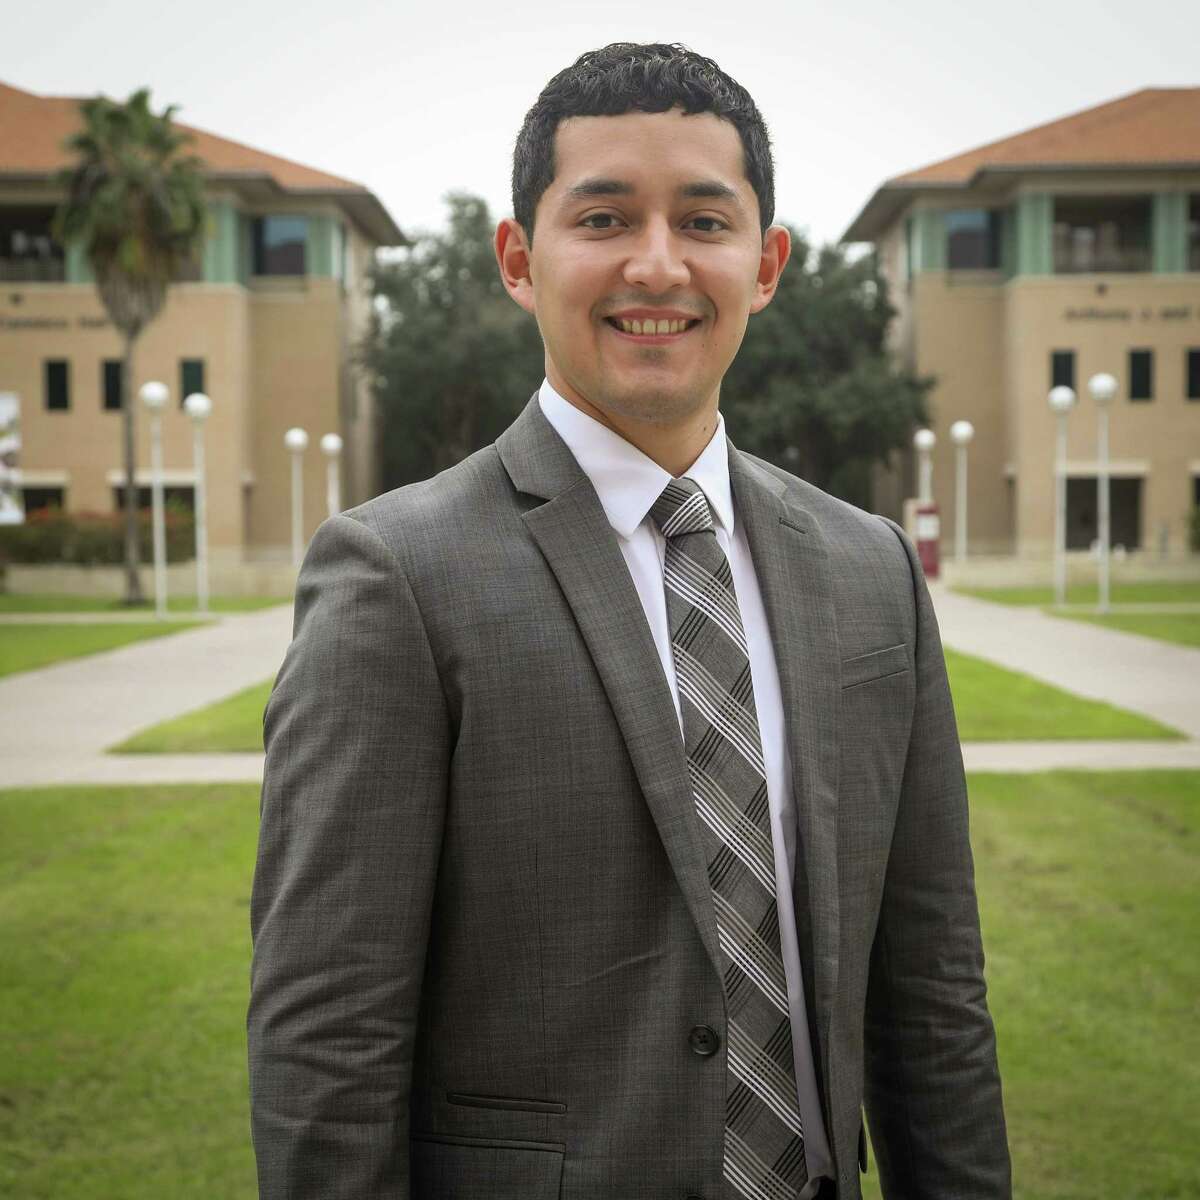 Eduardo Castillo recently received the U.S. Department of State’s Charles B. Rangel International Affairs Graduate Fellowship. Castillo will use this fellowship to attend Georgetown University in the fall.